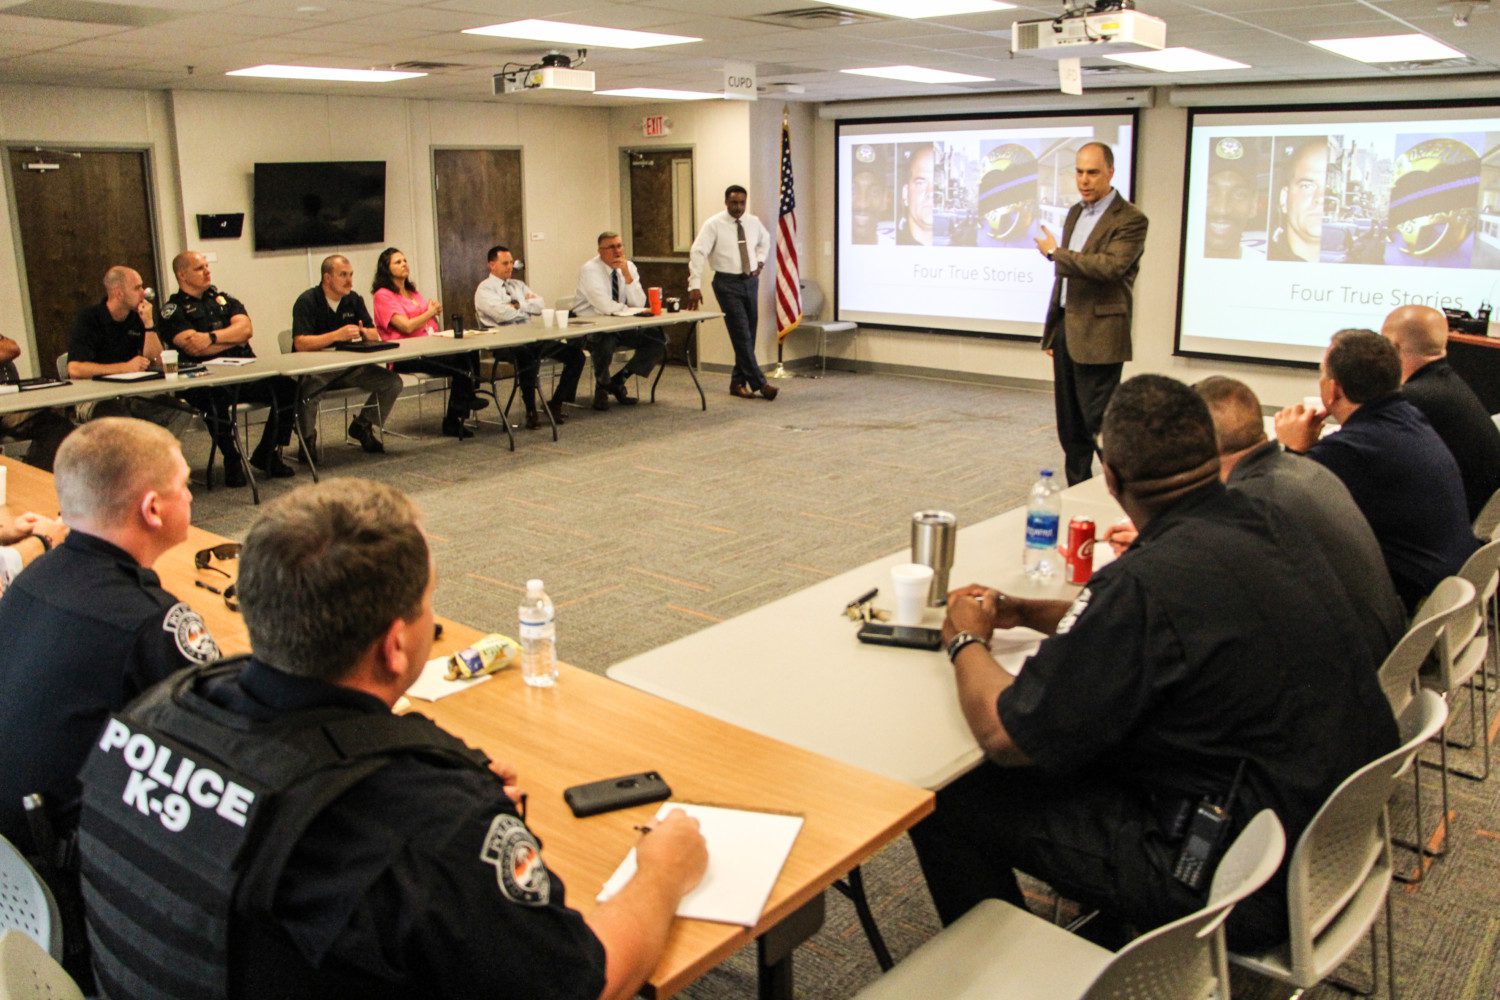 Jonathan Aronie (speaking) and Otha Sandifer presented recently to Clemson University Police Department and other partners on the integration of skills and practices that make up ethical policing.